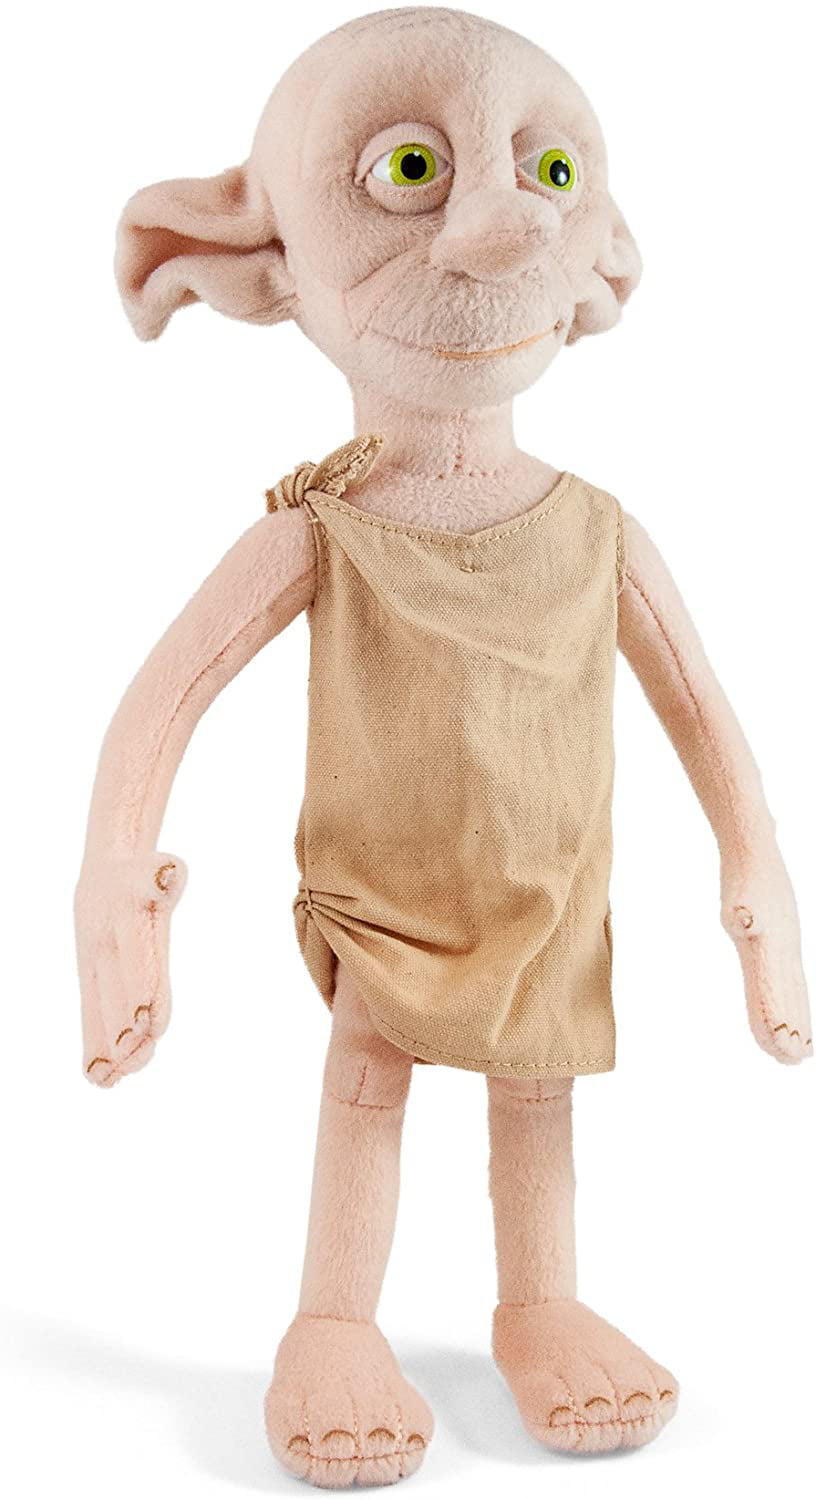 Harry Potter The Noble Collection Elf Dobby Plush 13" NN7619 Soft Toy Age 3 for sale online 